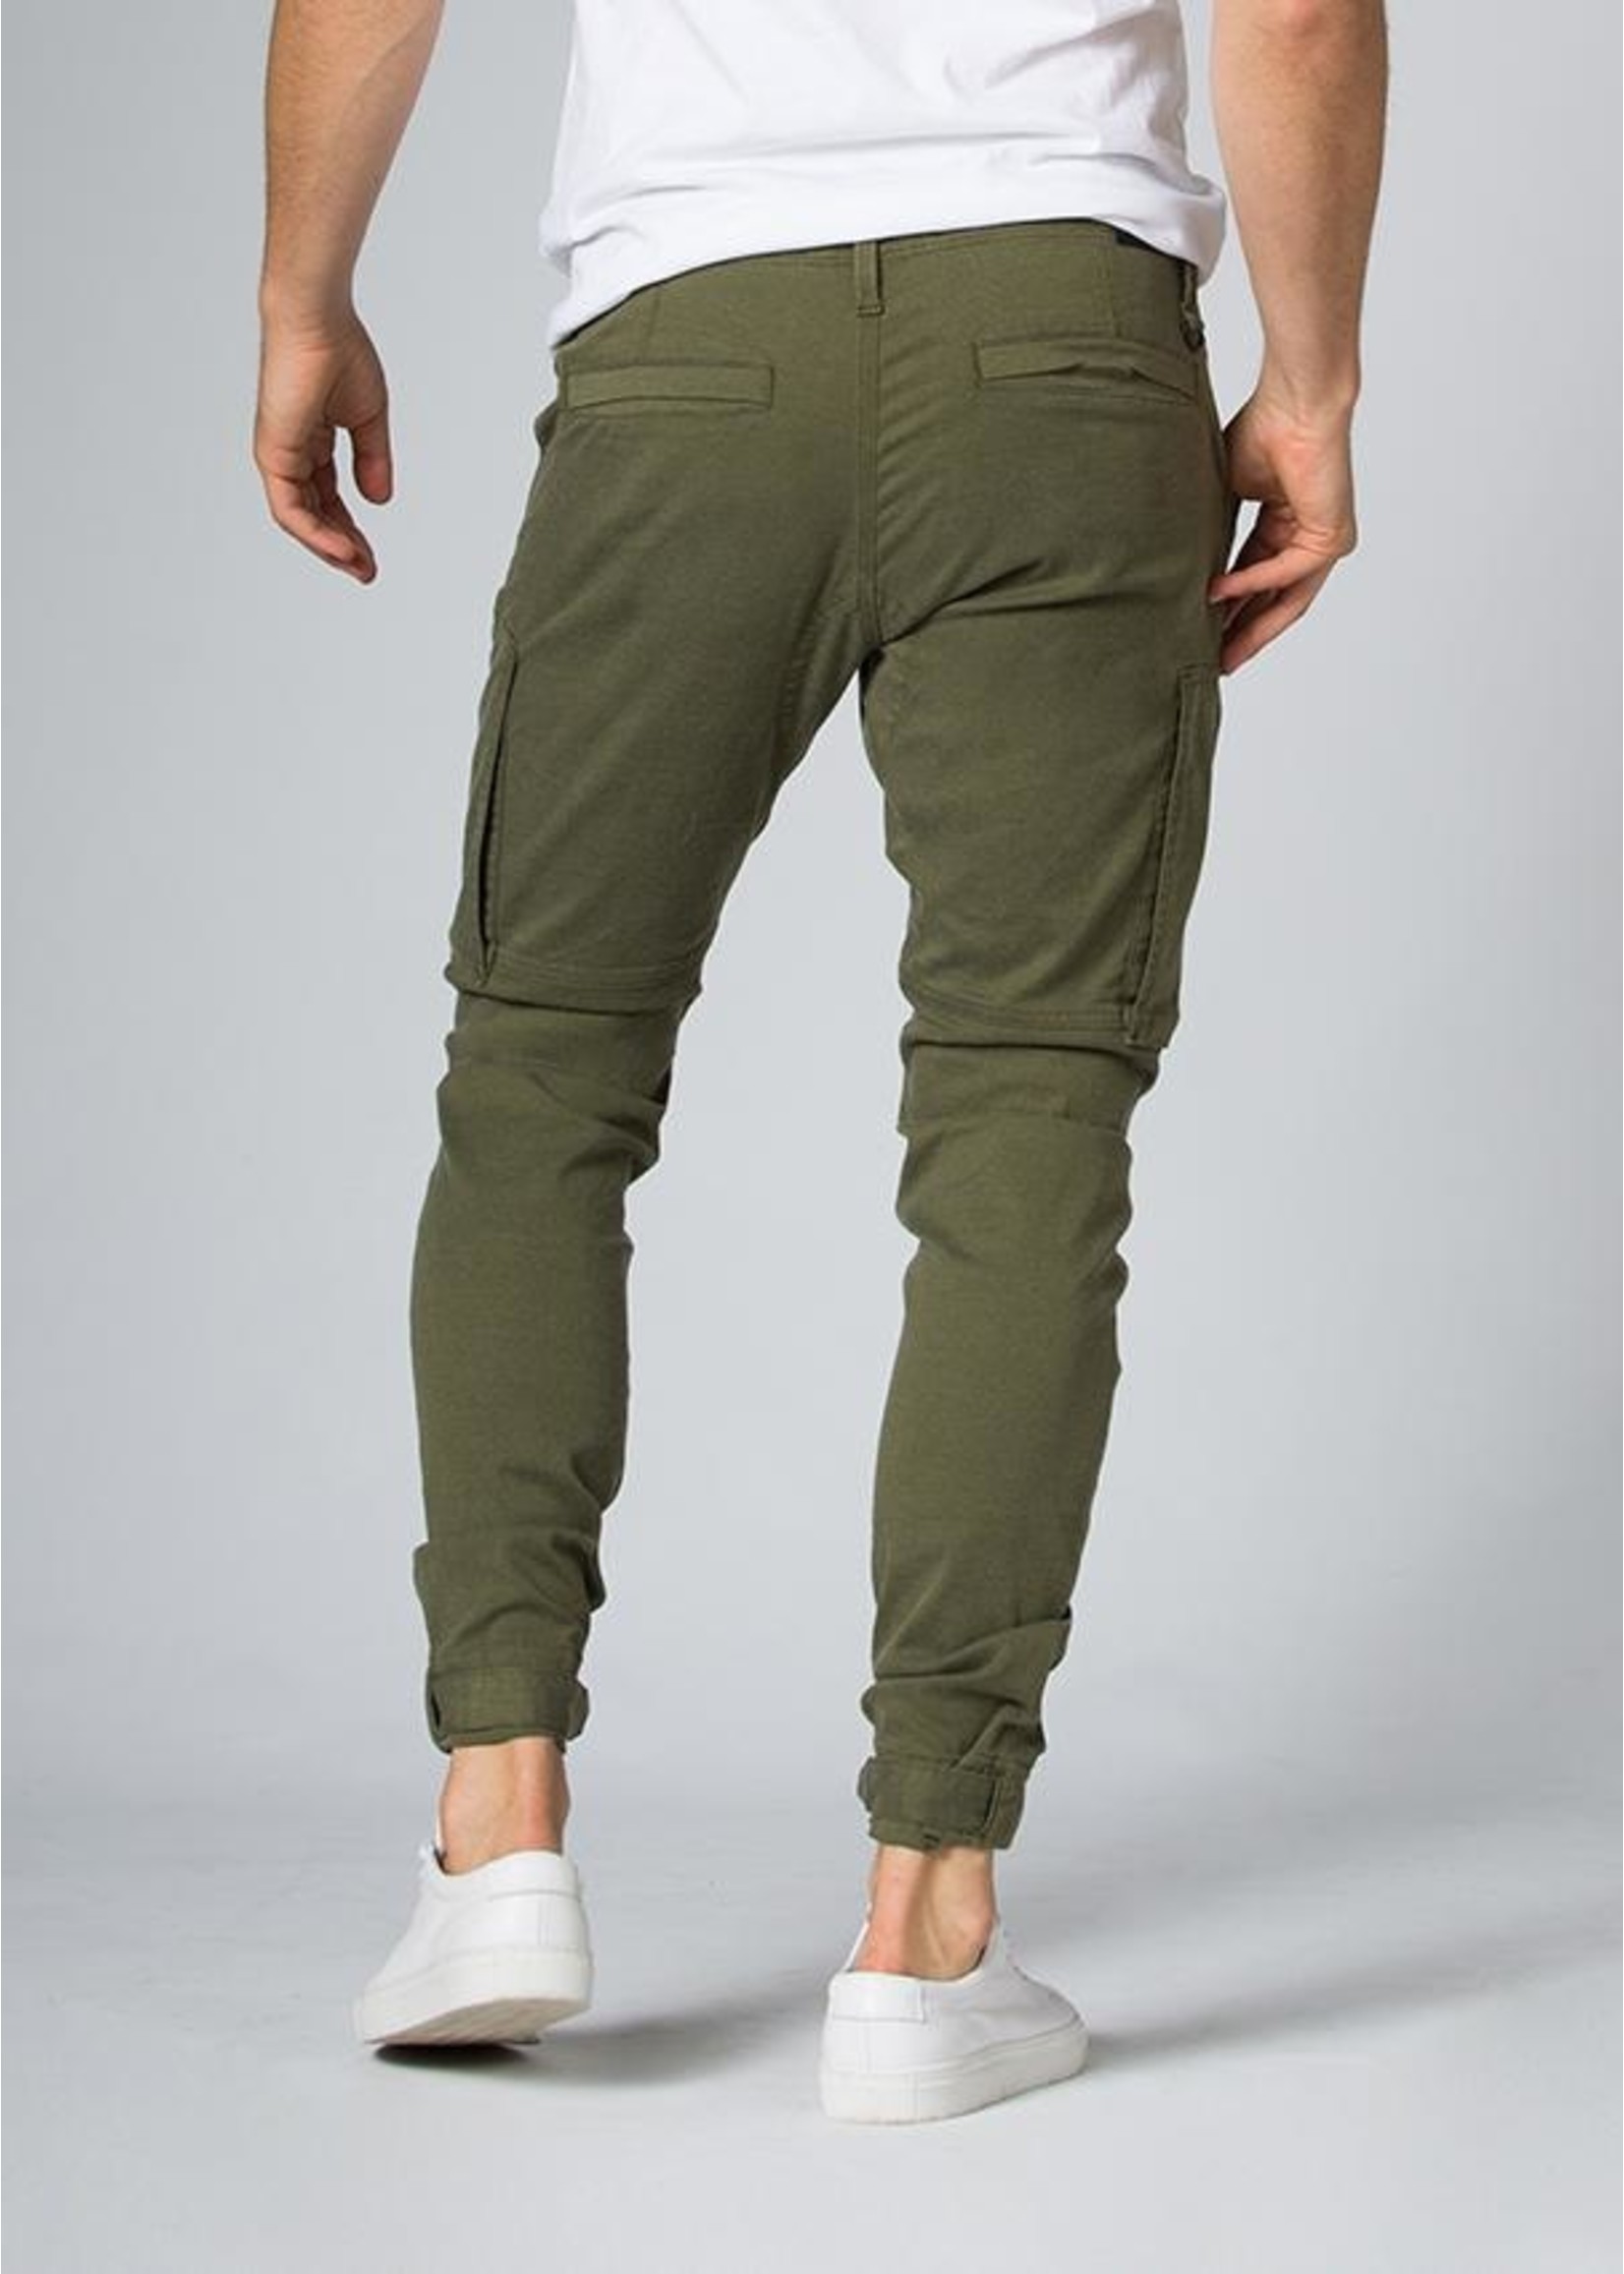 DUER Live Free Adventure Pant - Loden Green